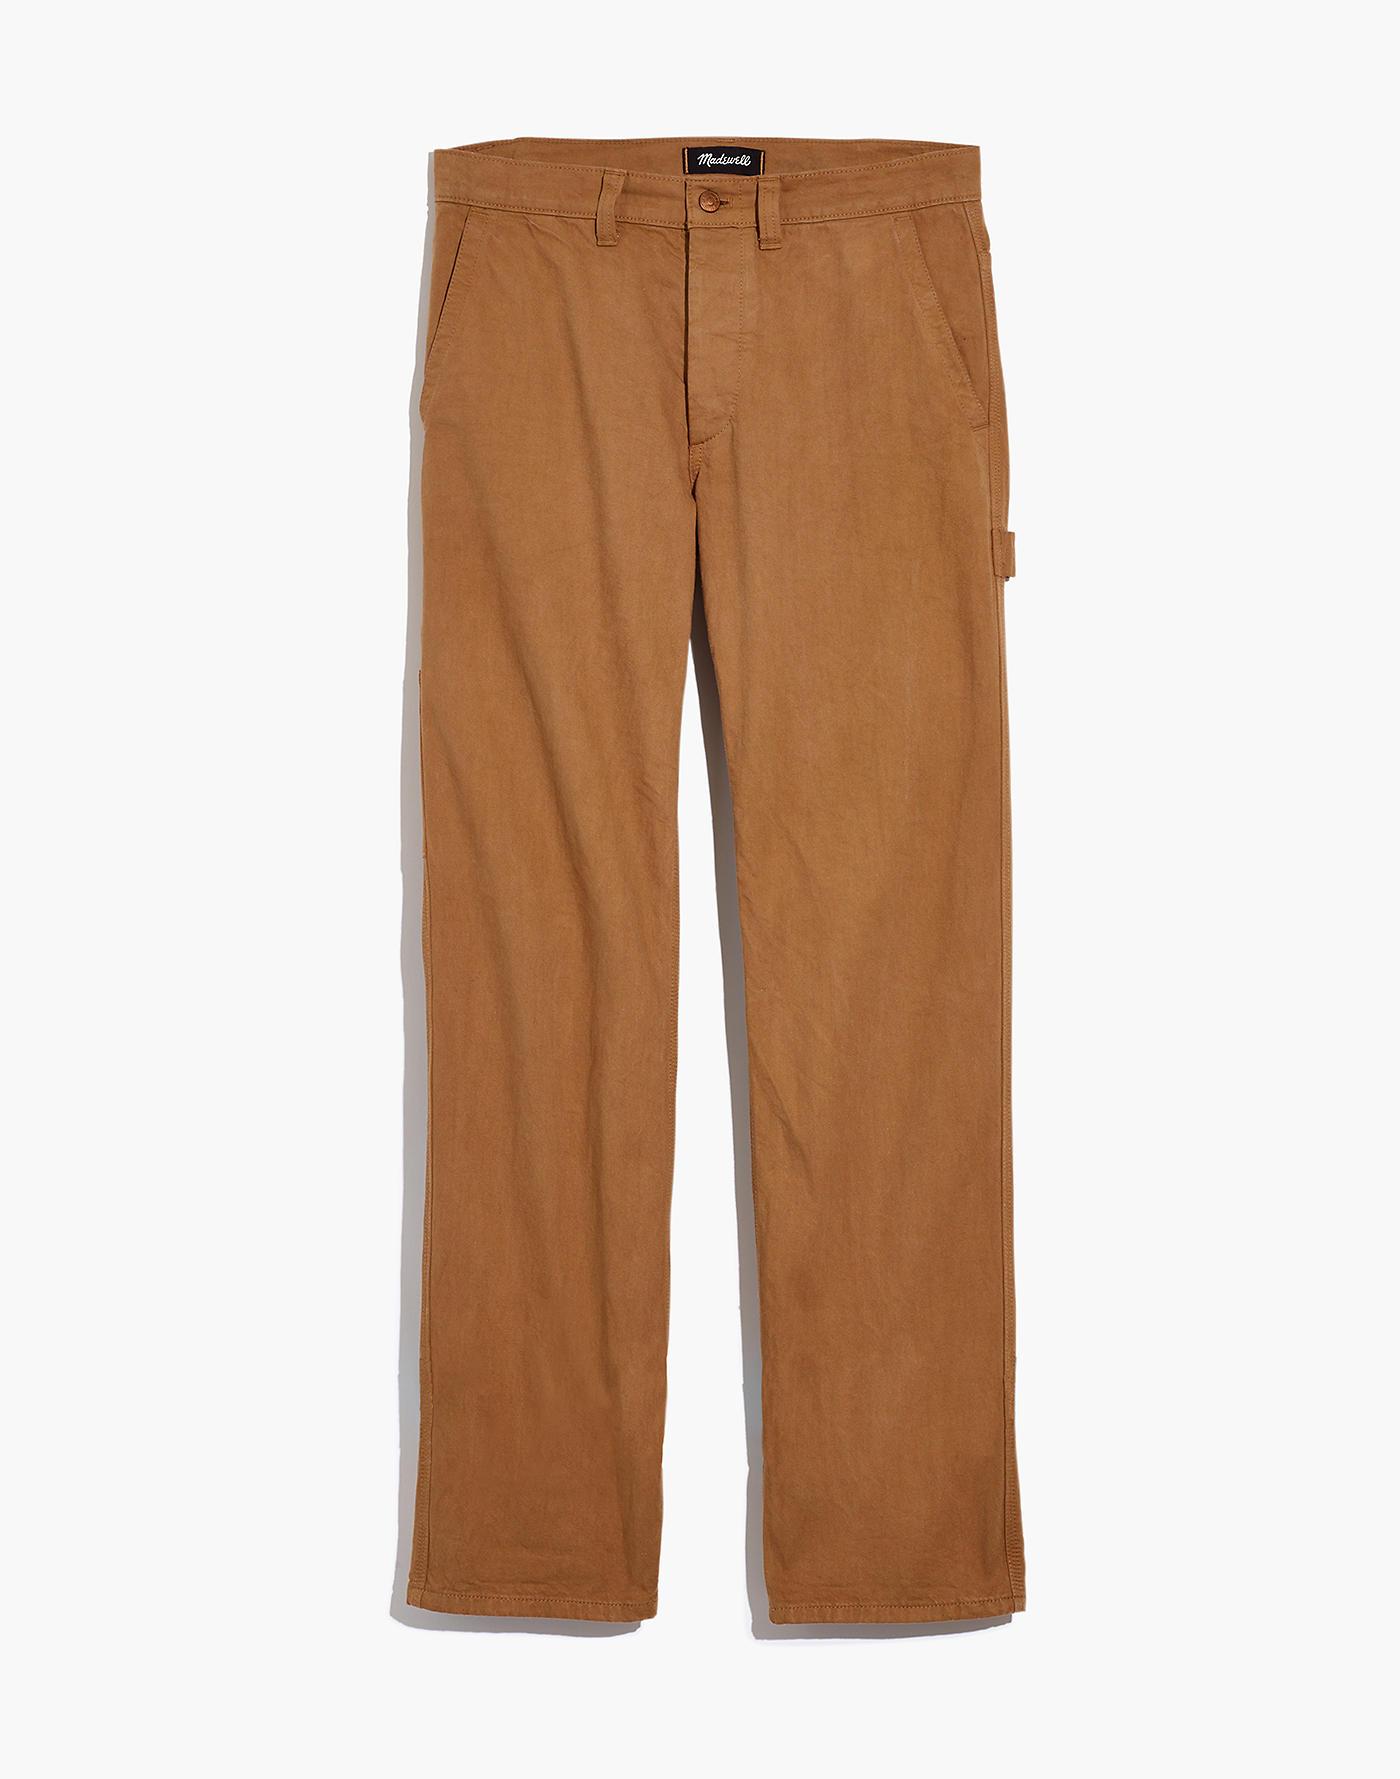 Madewell Flannel Carpenter Pants in Brown for Men - Lyst